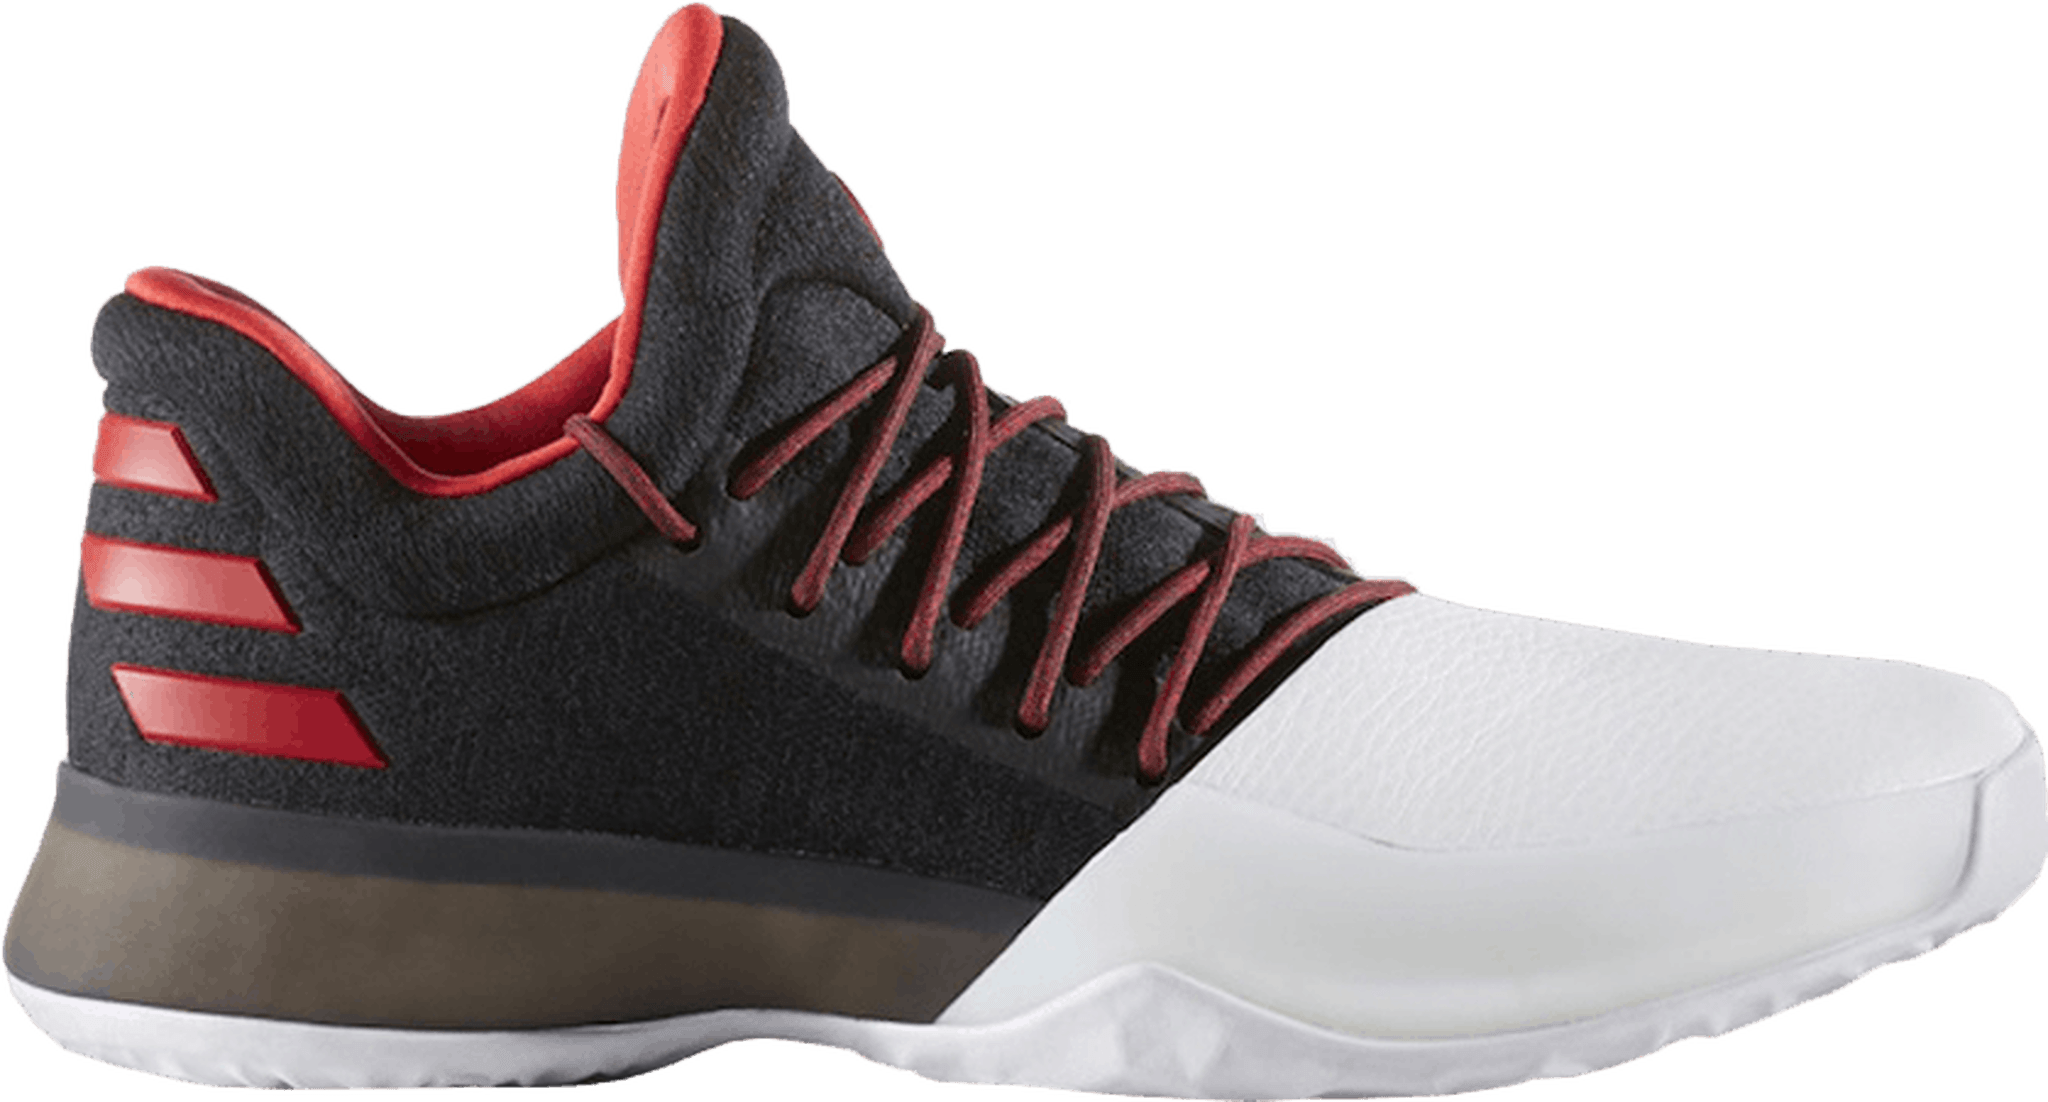 Adidas Harden Volume 1 Performance Review